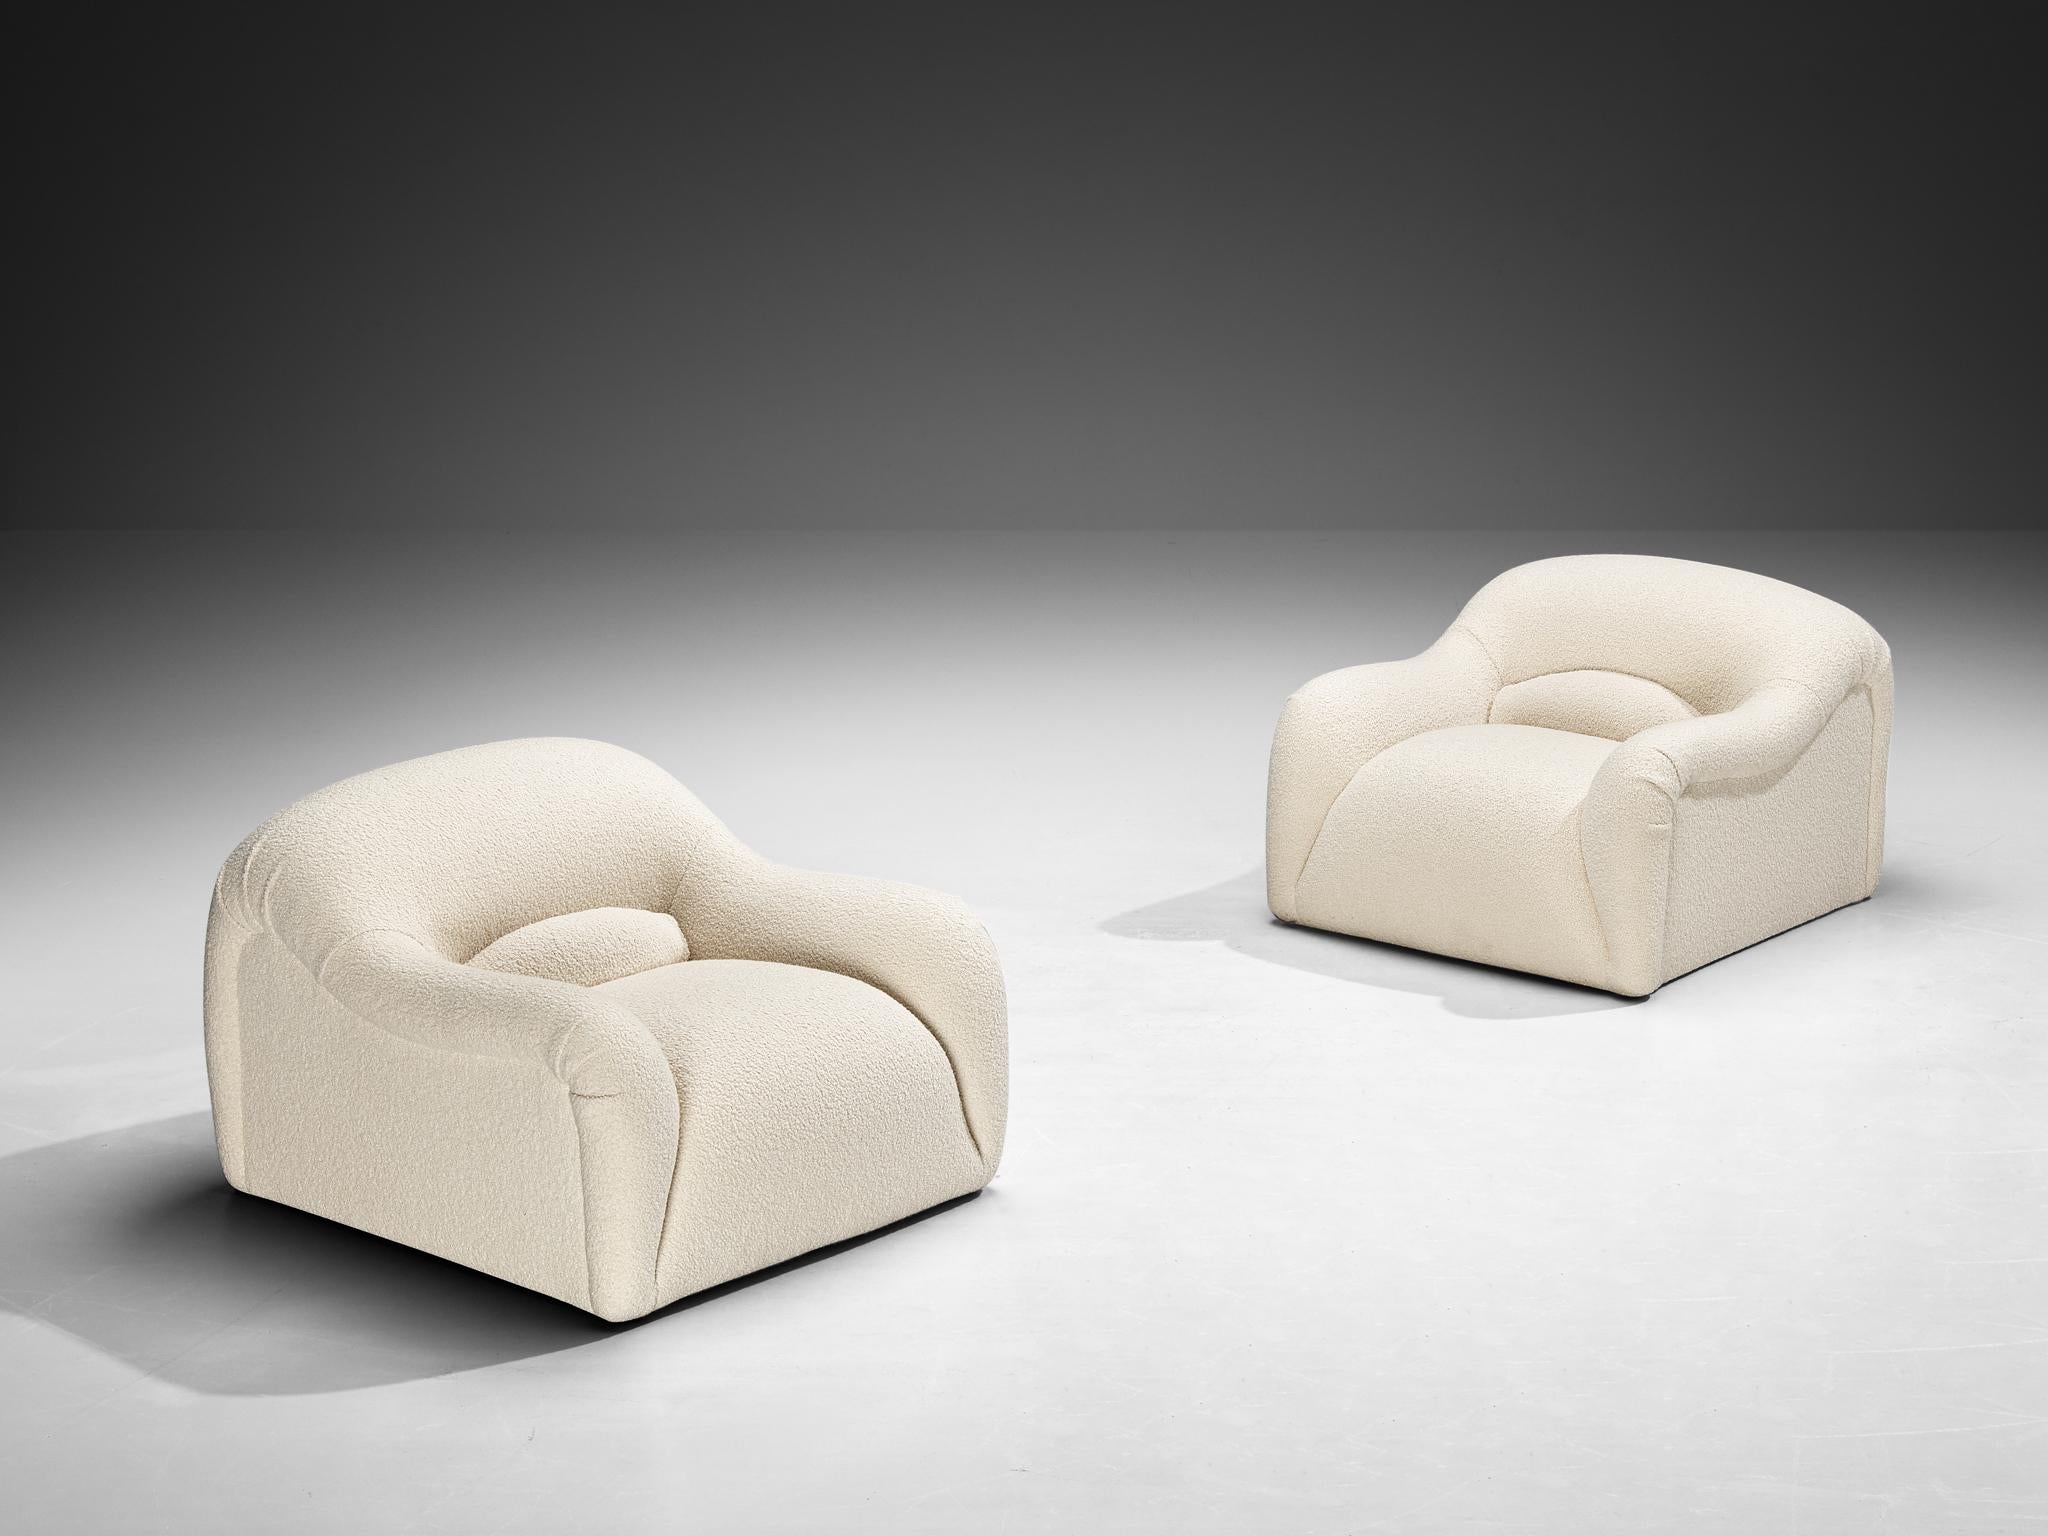 Emilio Guarnacci for 1P, pair of 'Ecuba' lounge chairs, acrylonitrile butadiene styrene, foam, bouclé, Italy, design 1969 

Stunning pair of lounge chairs by Italian designer Emilio Guarnacci. The design forms a beautiful and organic appearing whole